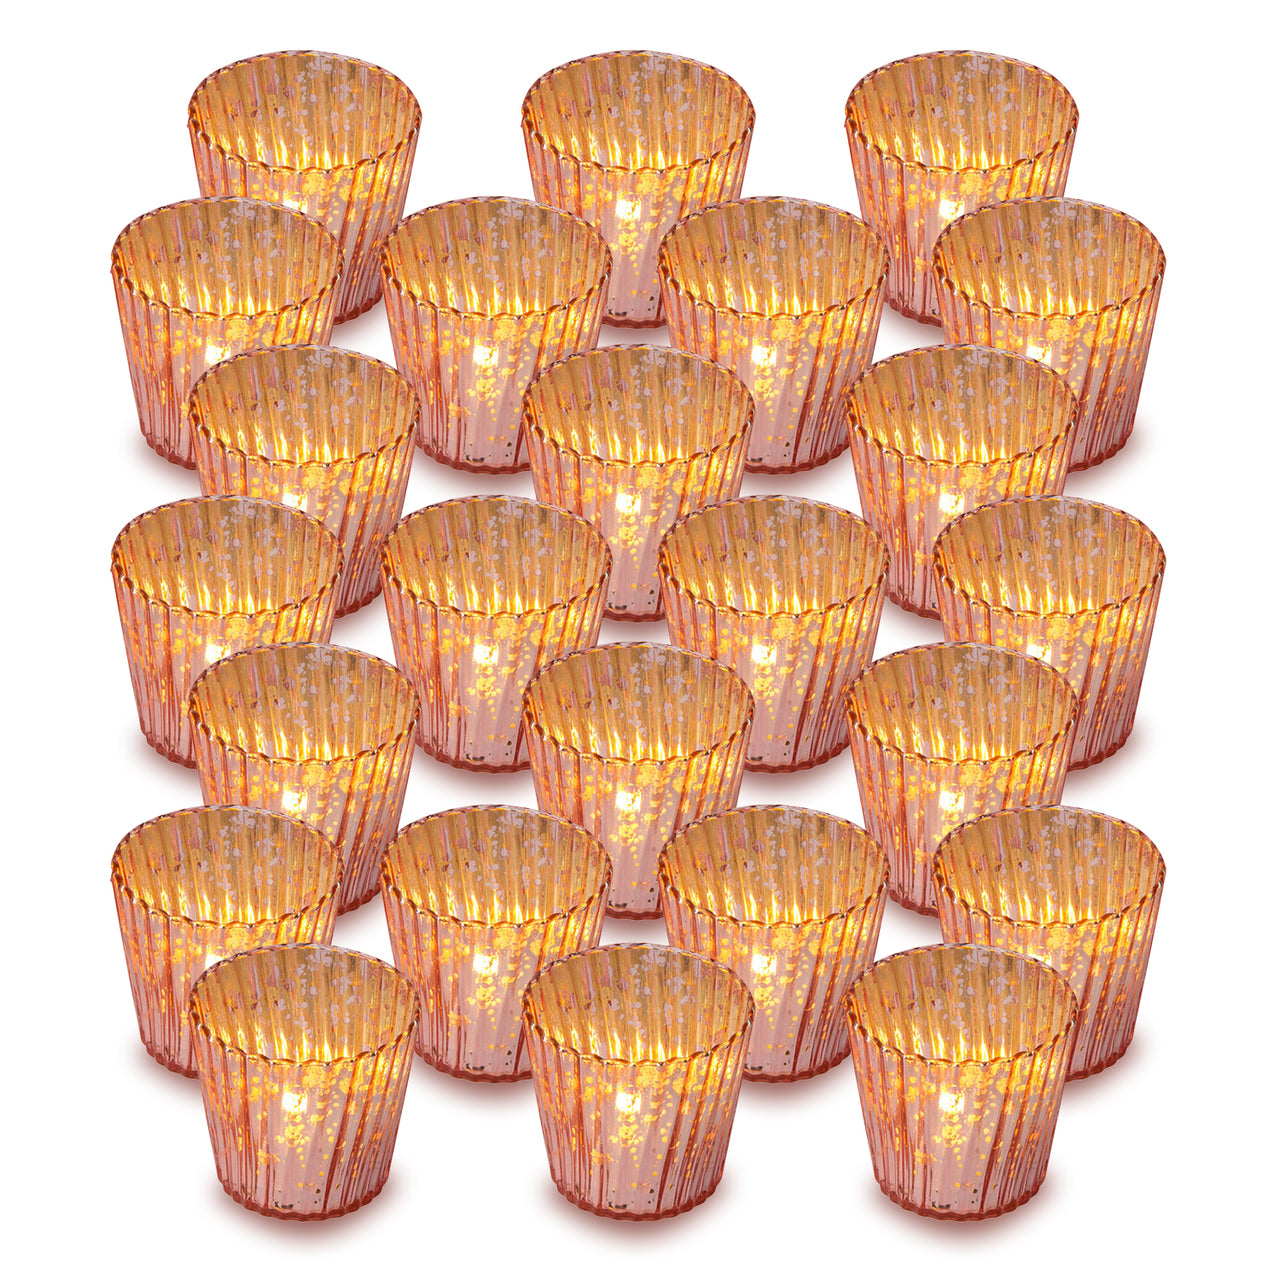 24 Pack | Vintage Mercury Glass Candle Holders (3-Inch, Caroline Design, Vertical Motif, Rose Gold Pink) - For use with Tea Lights - Home Decor, Parties and Wedding Decorations - PaperLanternStore.com - Paper Lanterns, Decor, Party Lights & More